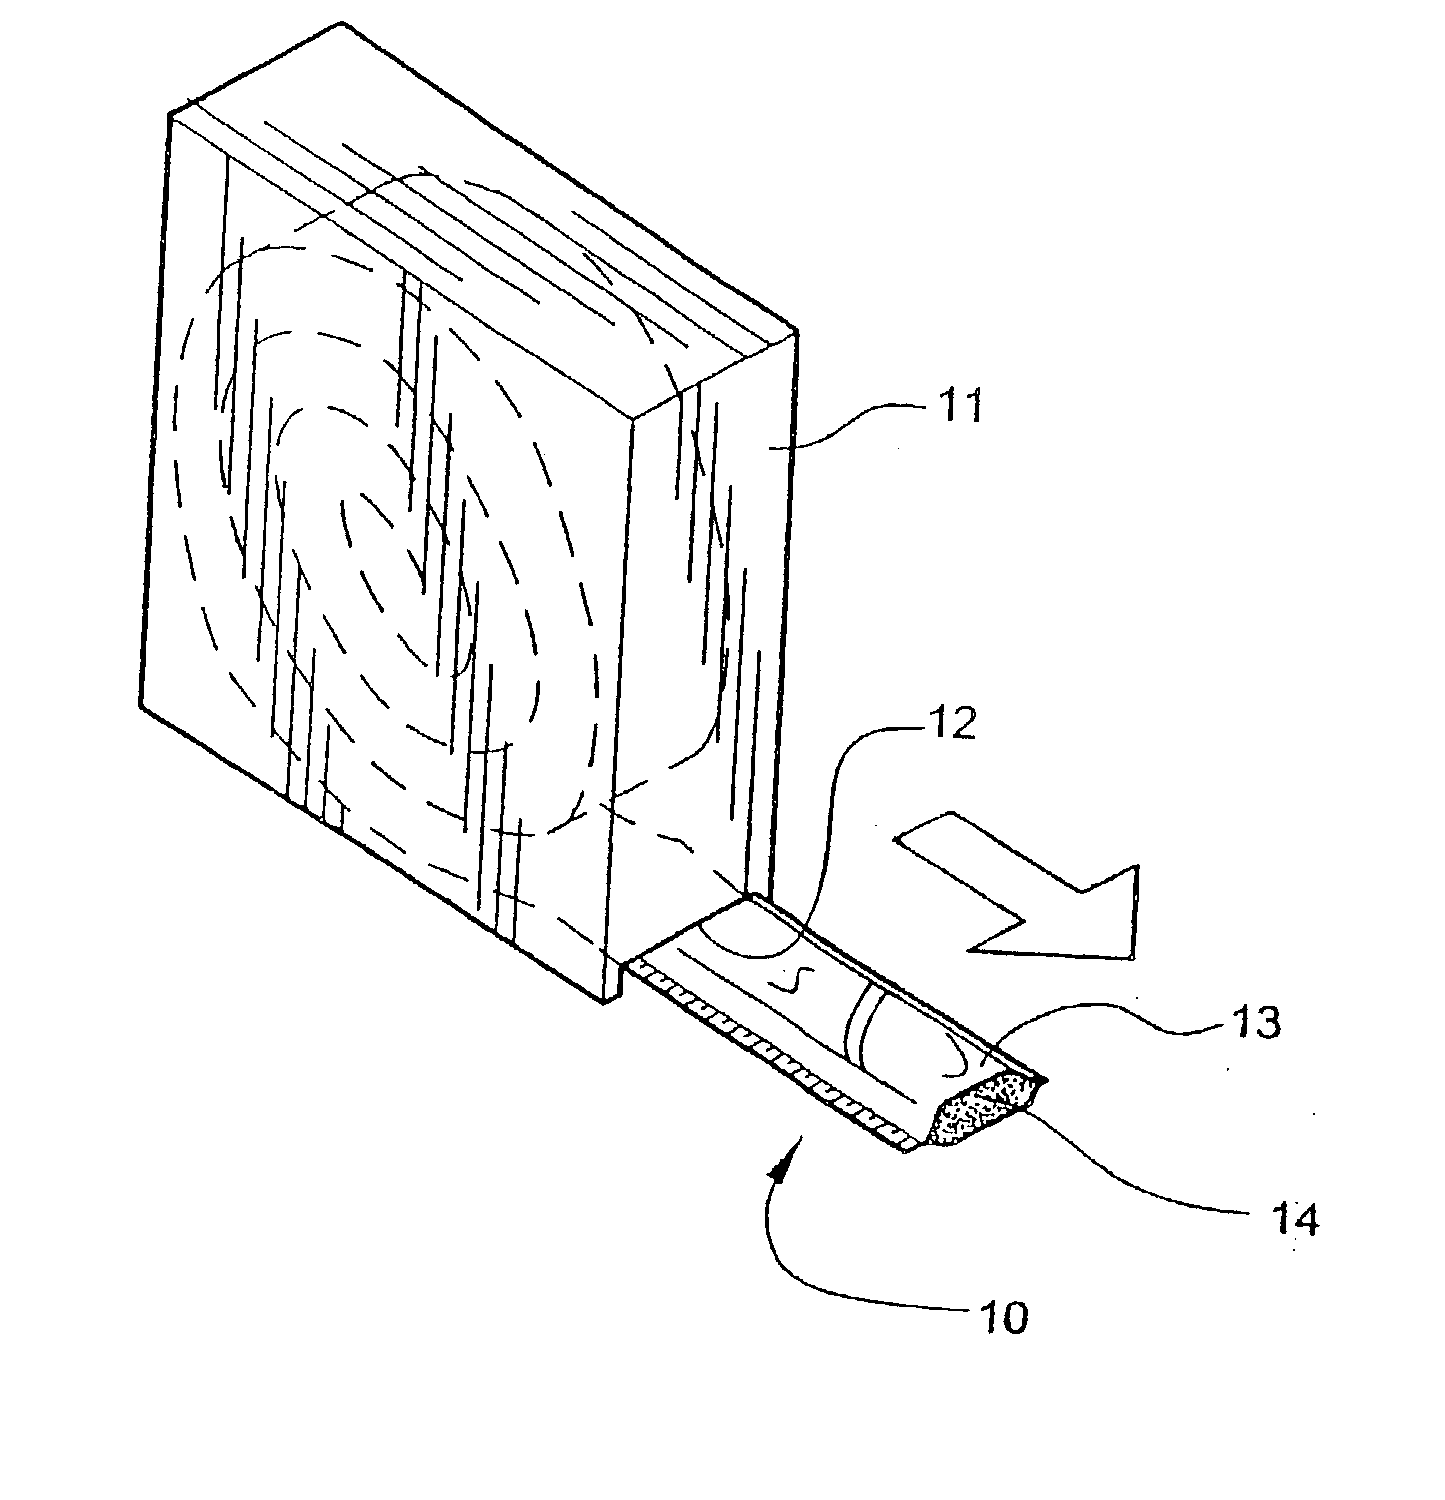 Medical bandaging product with tubular-knitted substrate and method of constructing same